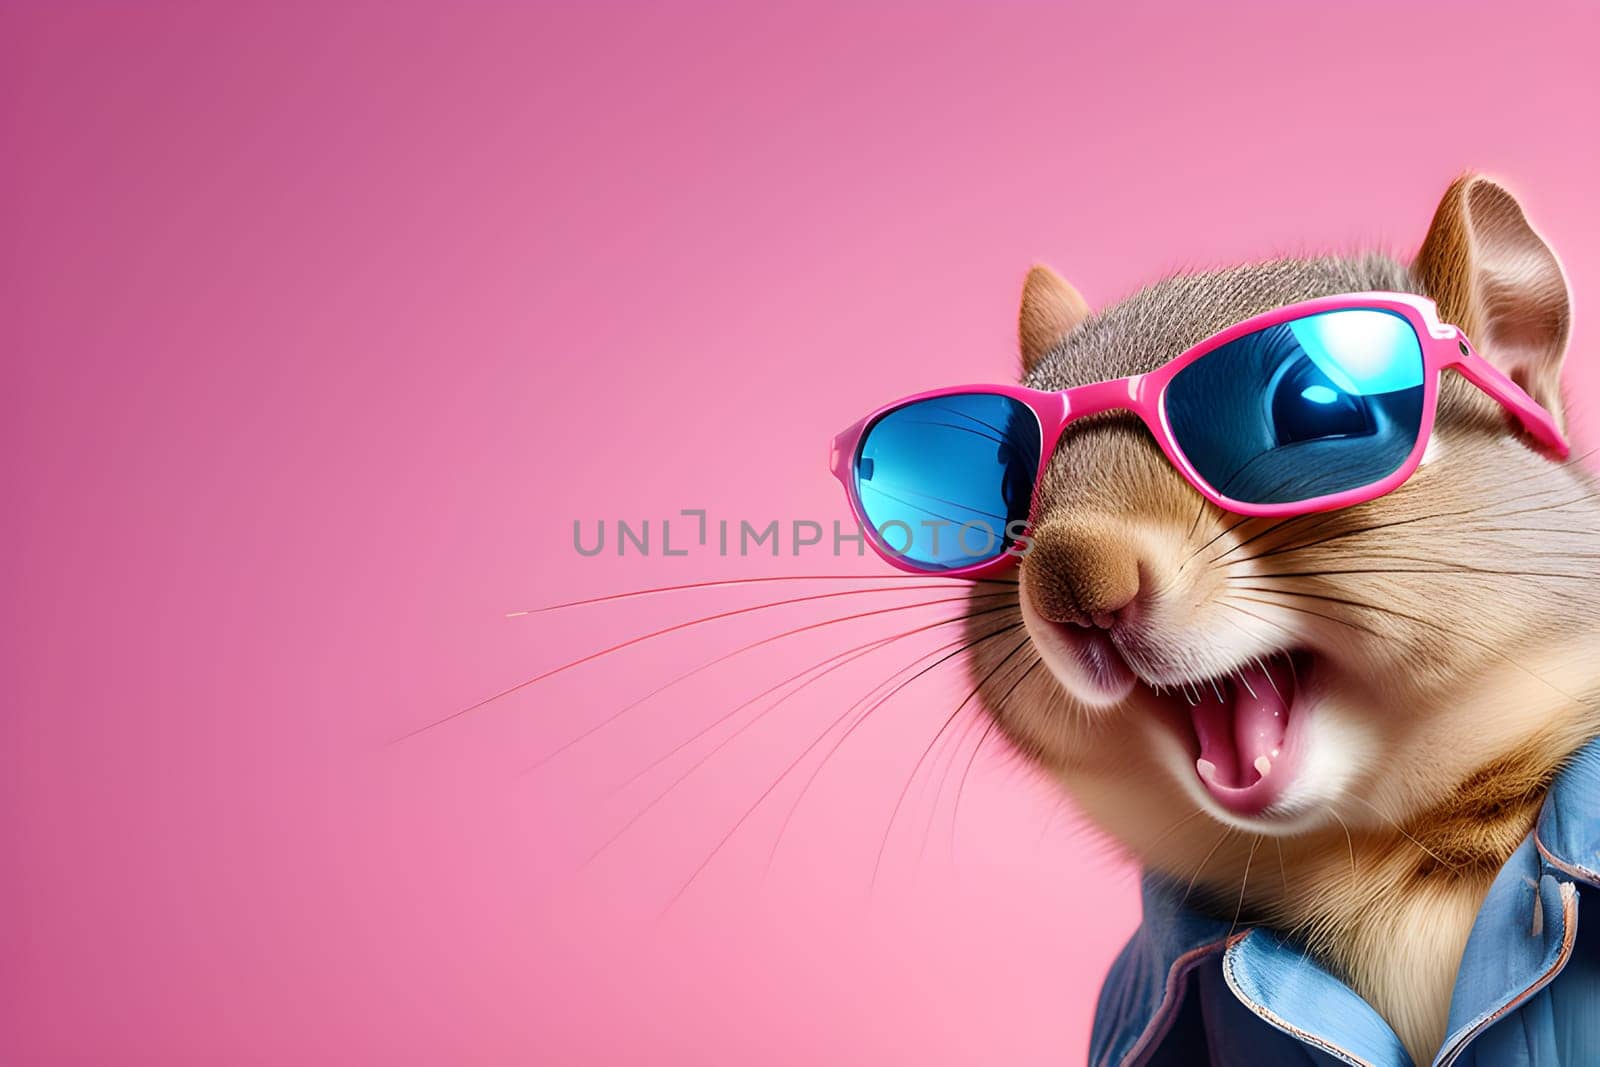 Squirrel man, kangaroo in a denim jacket and pink shirt with pink glasses on a pink background.